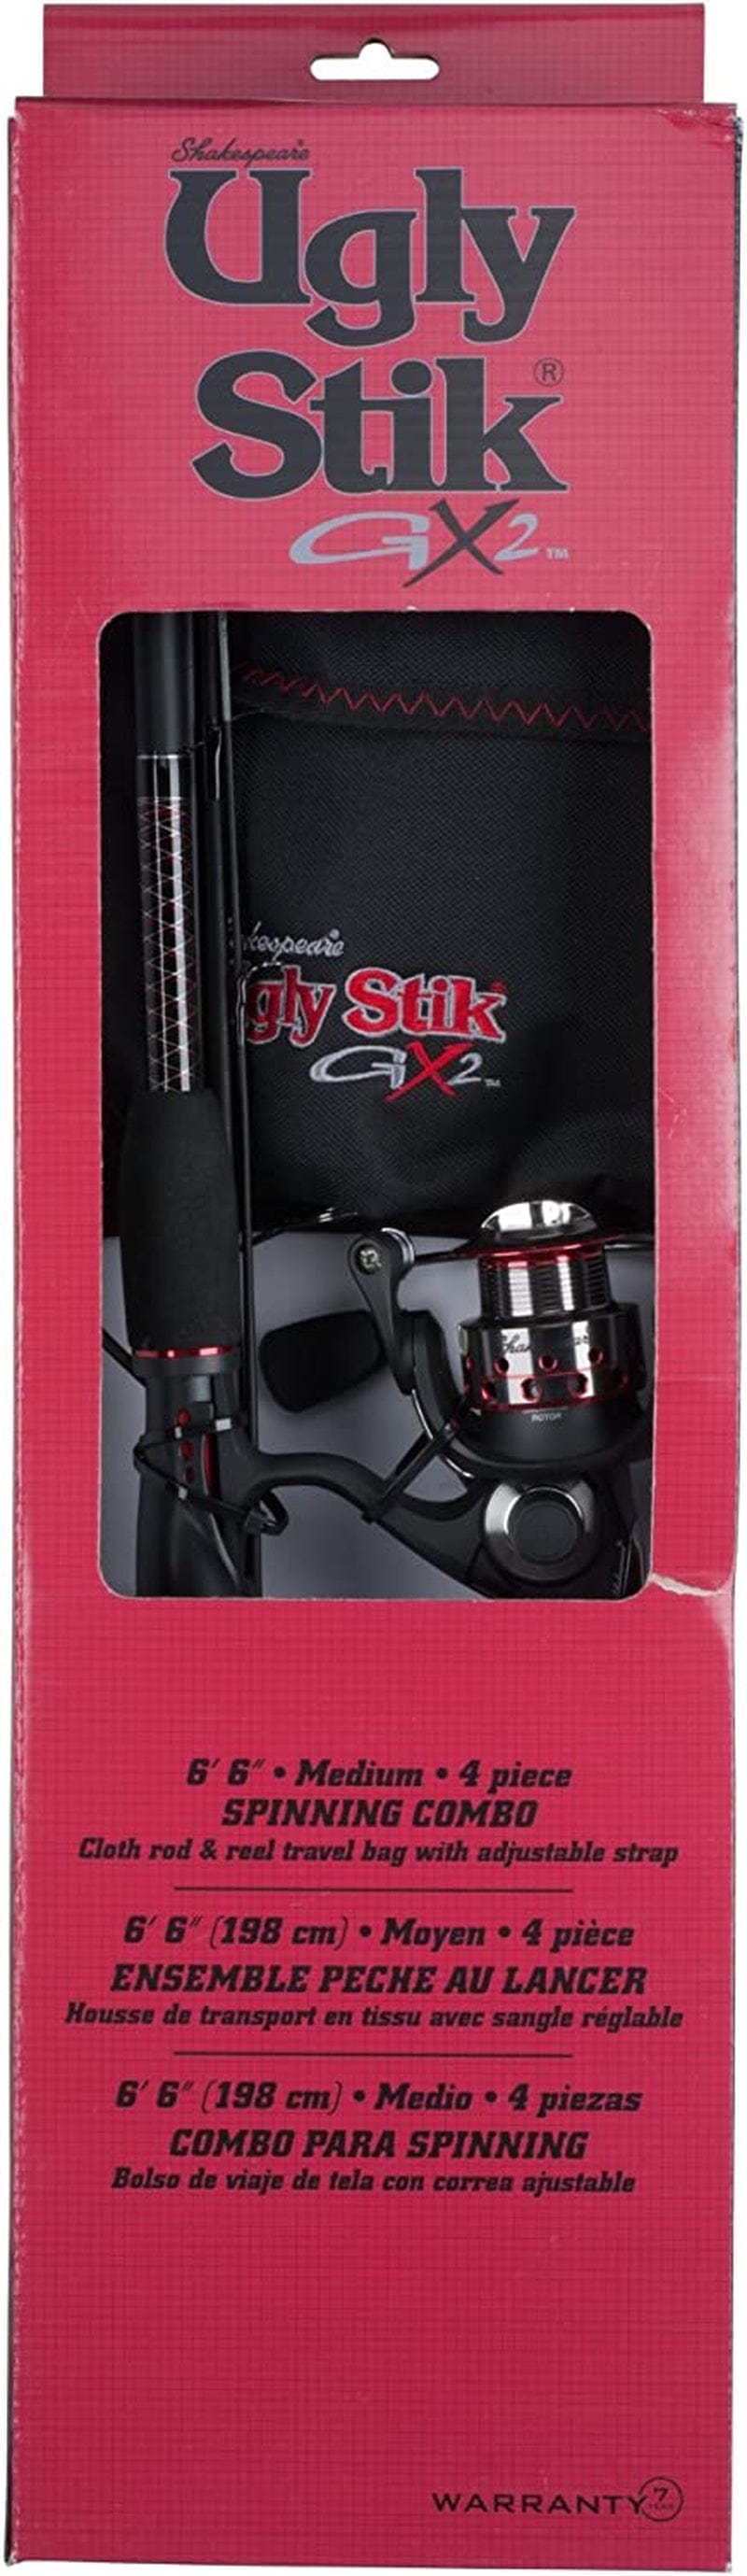 Ugly Stik GX2 Spinning Reel and Fishing Rod Combo Sporting Goods > Outdoor Recreation > Fishing > Fishing Rods Pure Fishing 30 Size Reel - 6' - Medium - 2pc - Ladies  